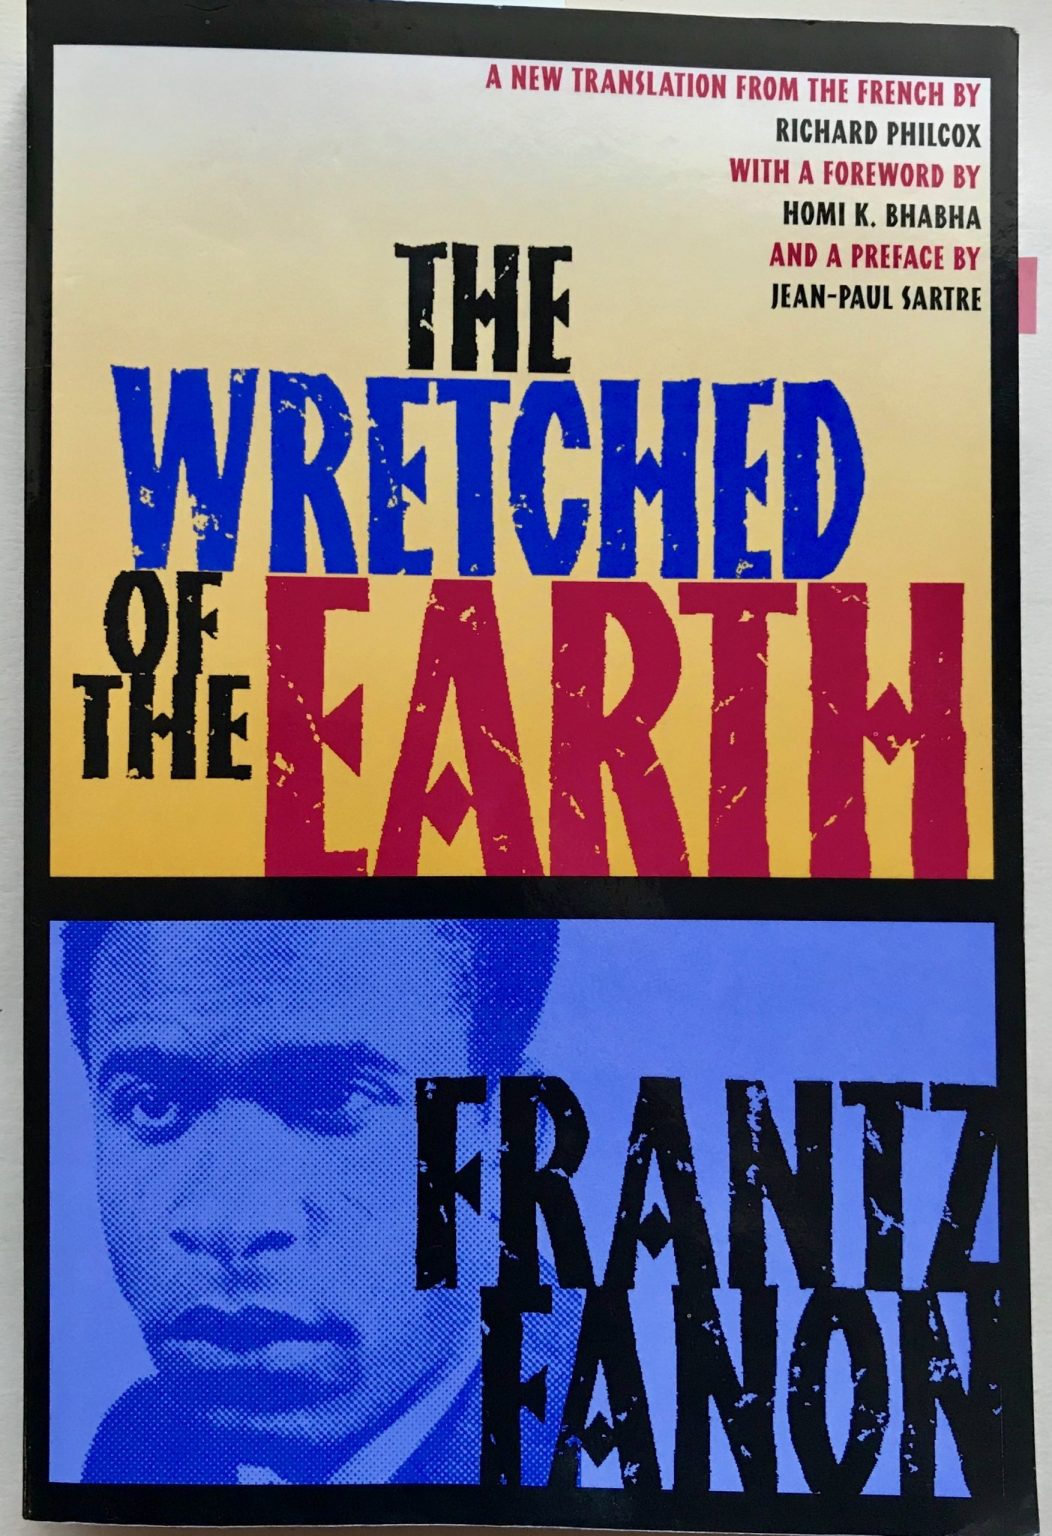 franz fanon three stages of decolonization